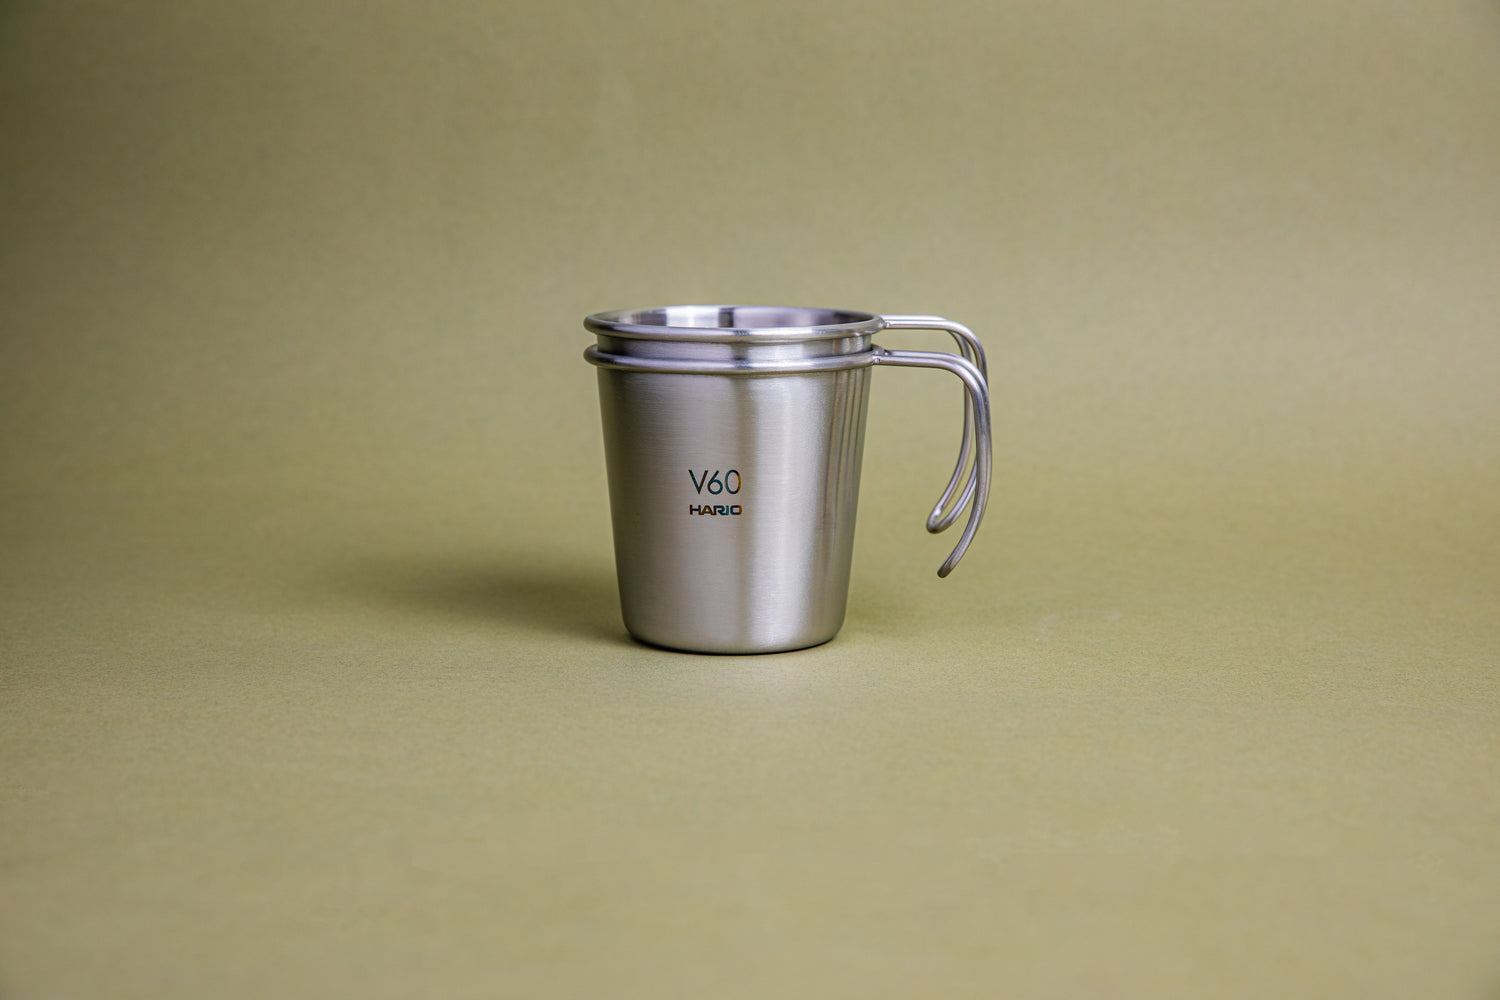 A sleek hairline silver camping mug with rounded lip and handle, etched Hario logo and V60 graphic, and set against a earth-tone background with another stacking mug stacked inside..